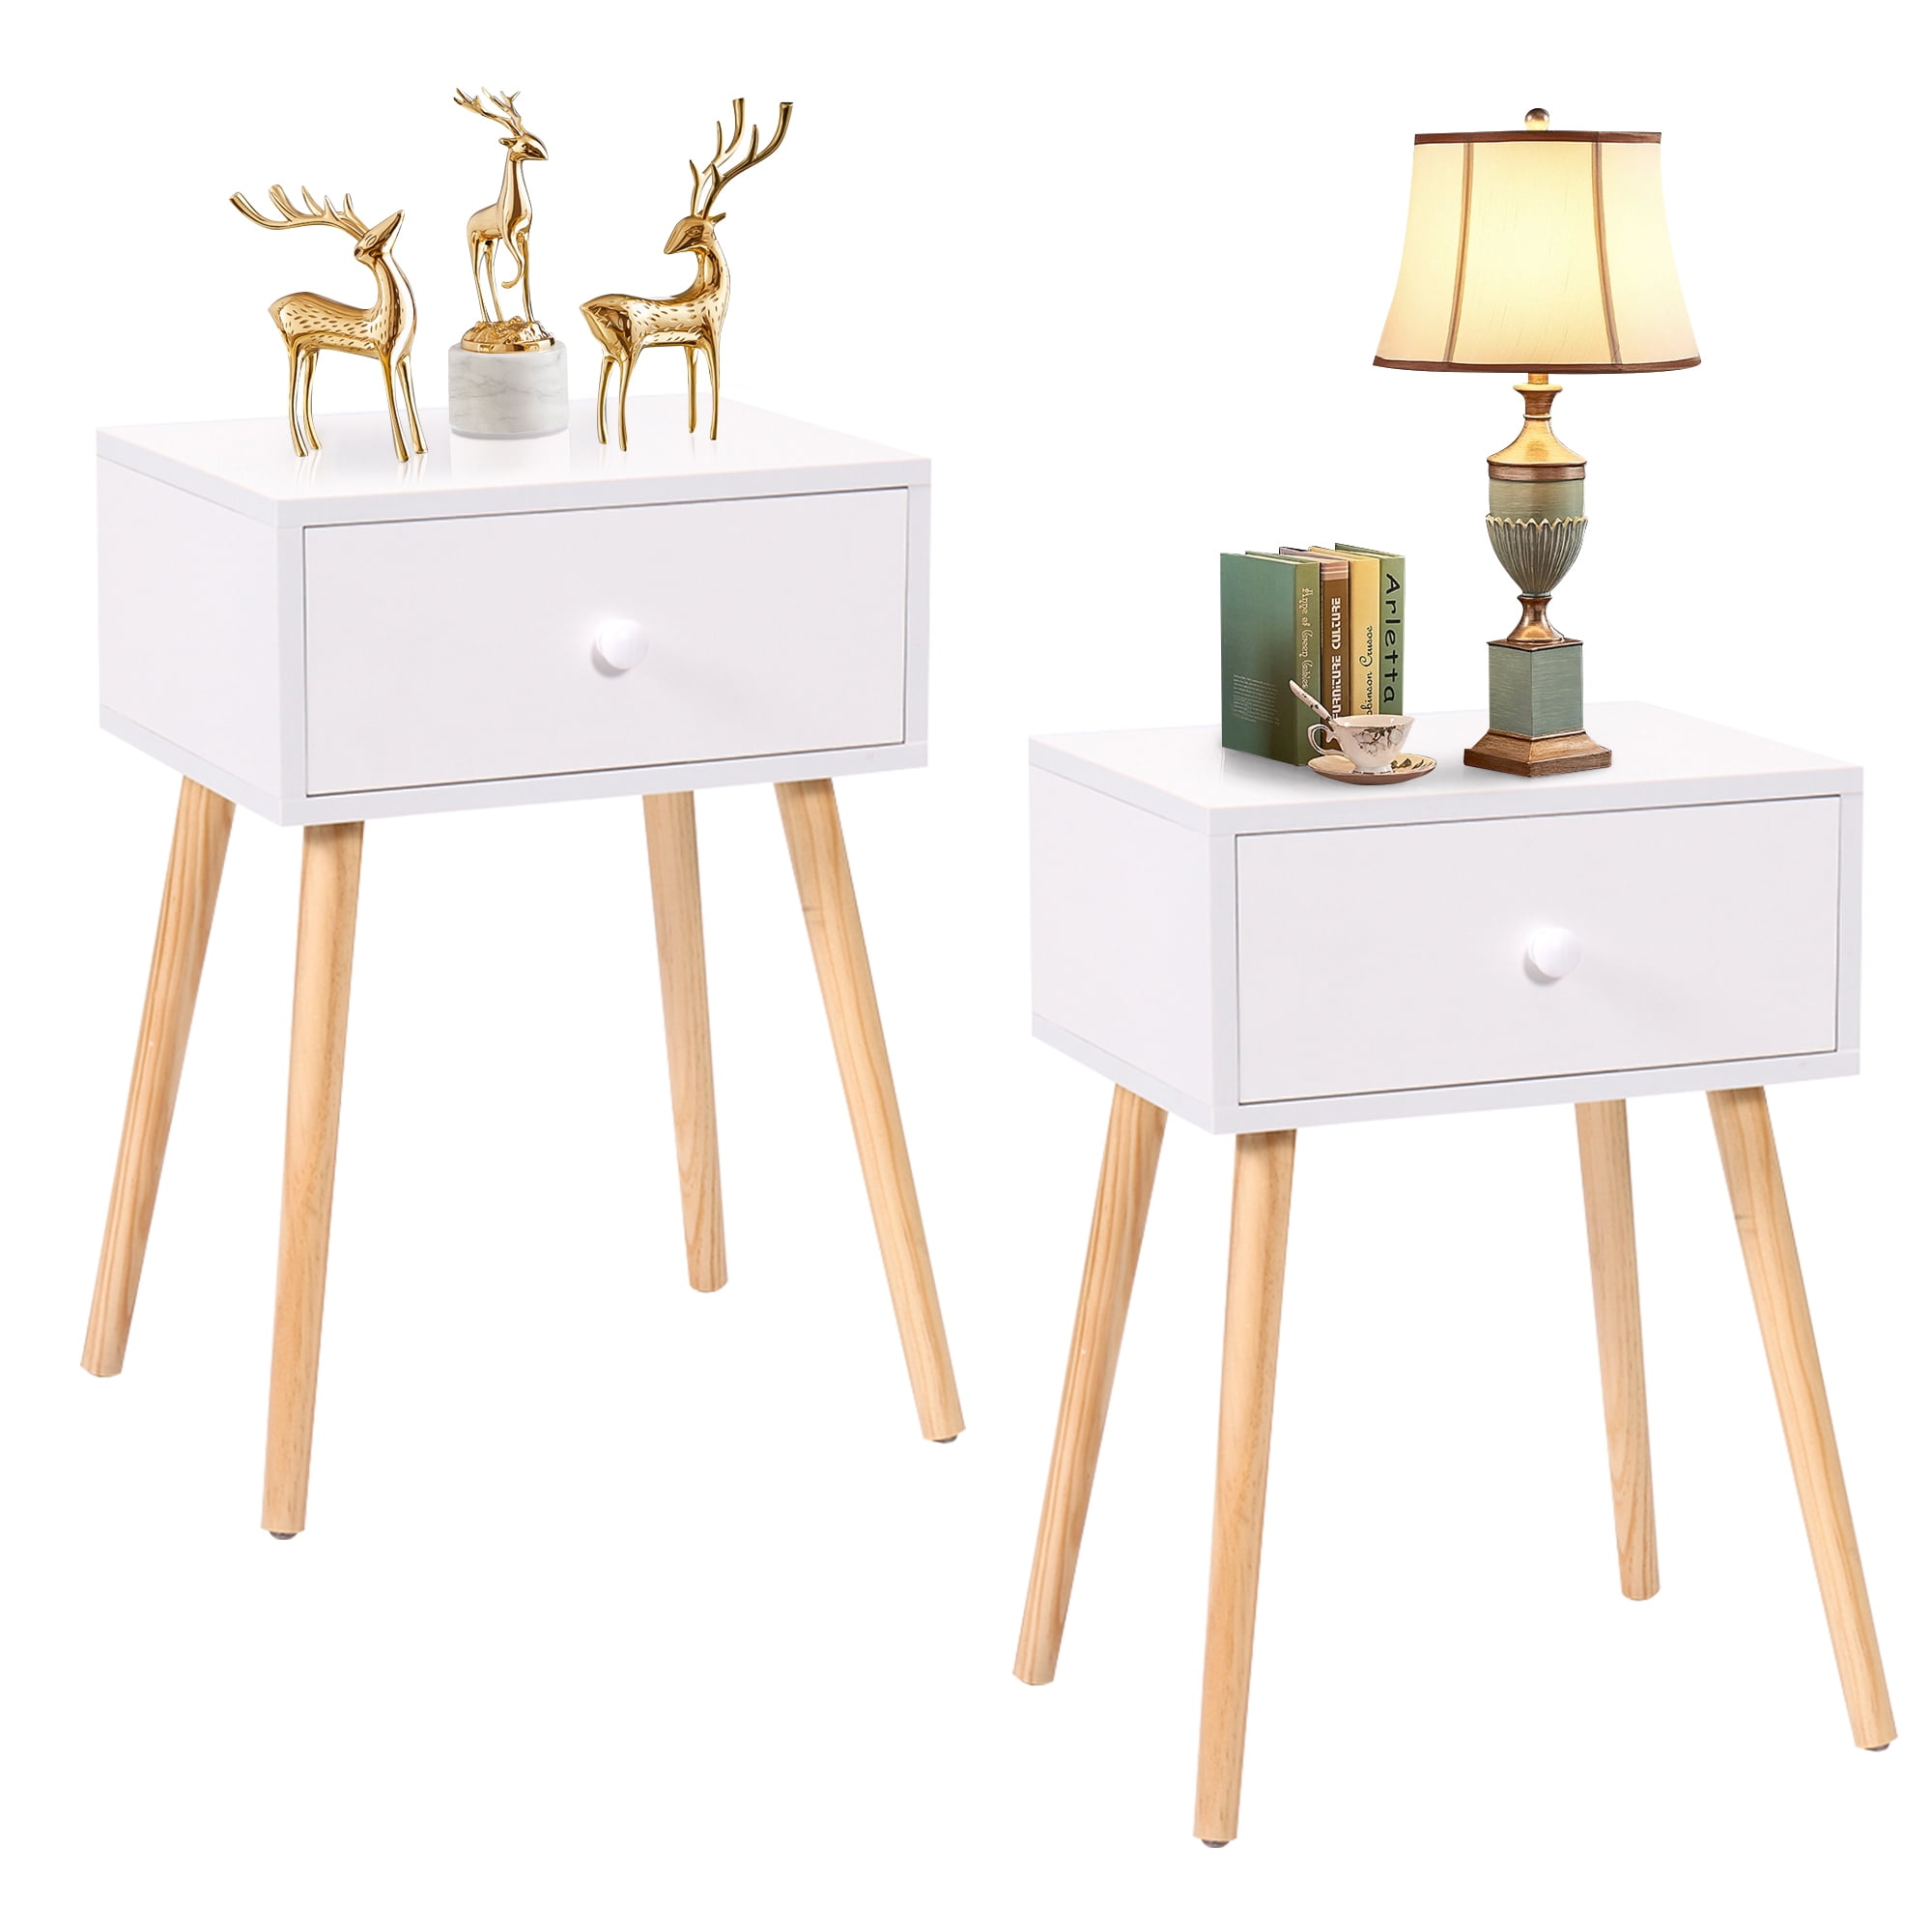 Modern White Bedside Table Set with Drawers